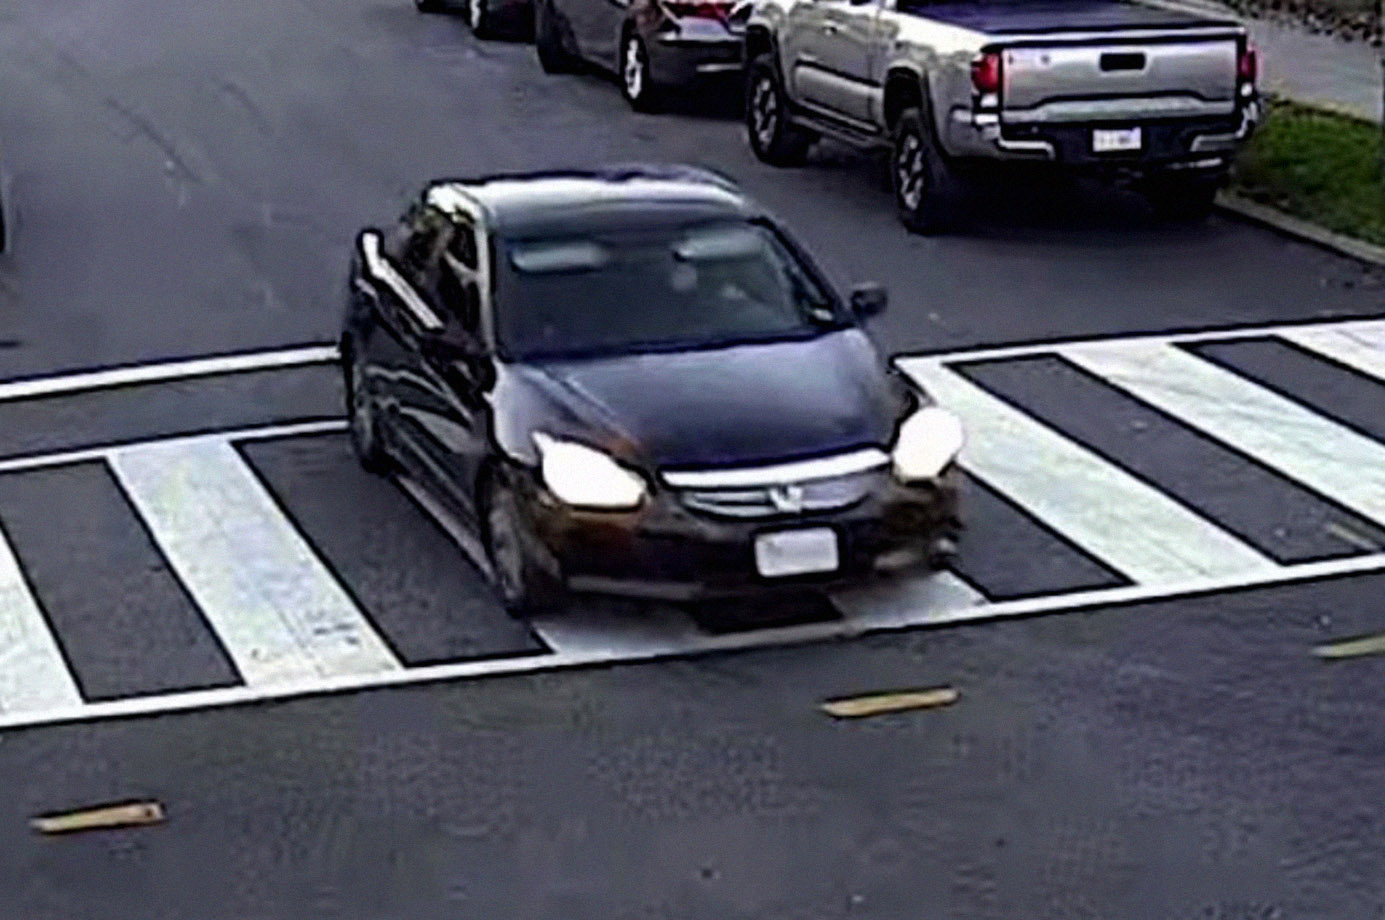 PHOTO: The DC Police Dept. seeks assistance in locating the pictured vehicle in connection with 3 deaths that occurred in Washington, D.C. on Sept. 4, 2021. The vehicle is described as a black Honda Accord sedan. 